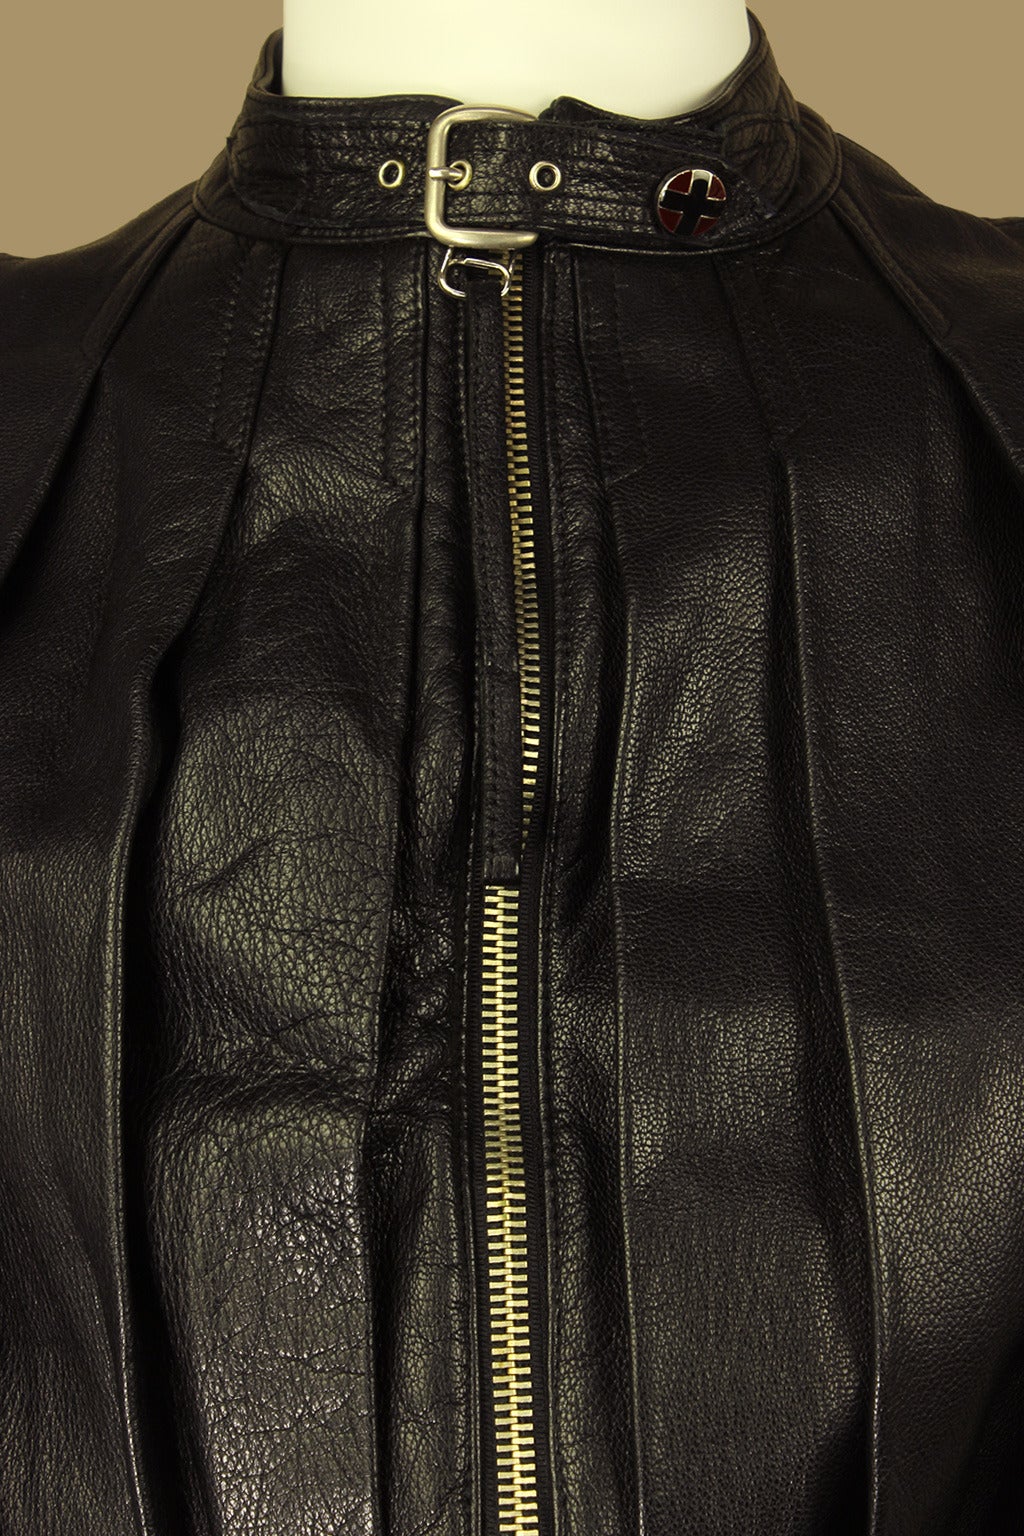 Jean Paul Gaultier Men's 1990s Highly Styled Leather Moto Jacket 1